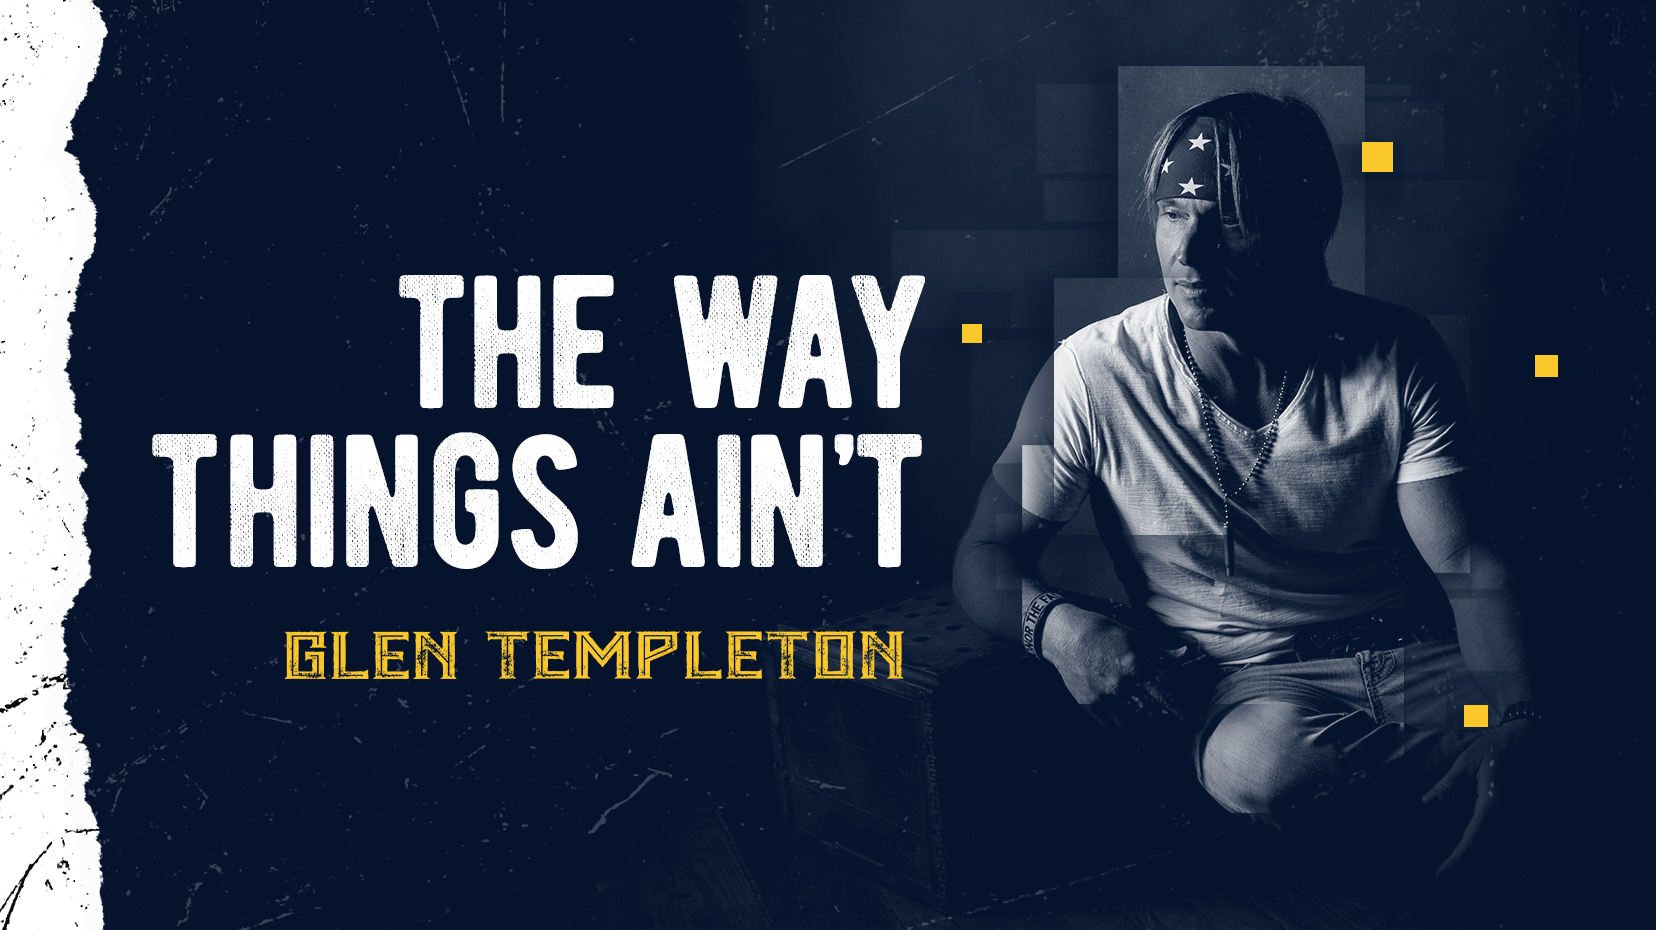 Glen Templeton – The Way Things Ain’t